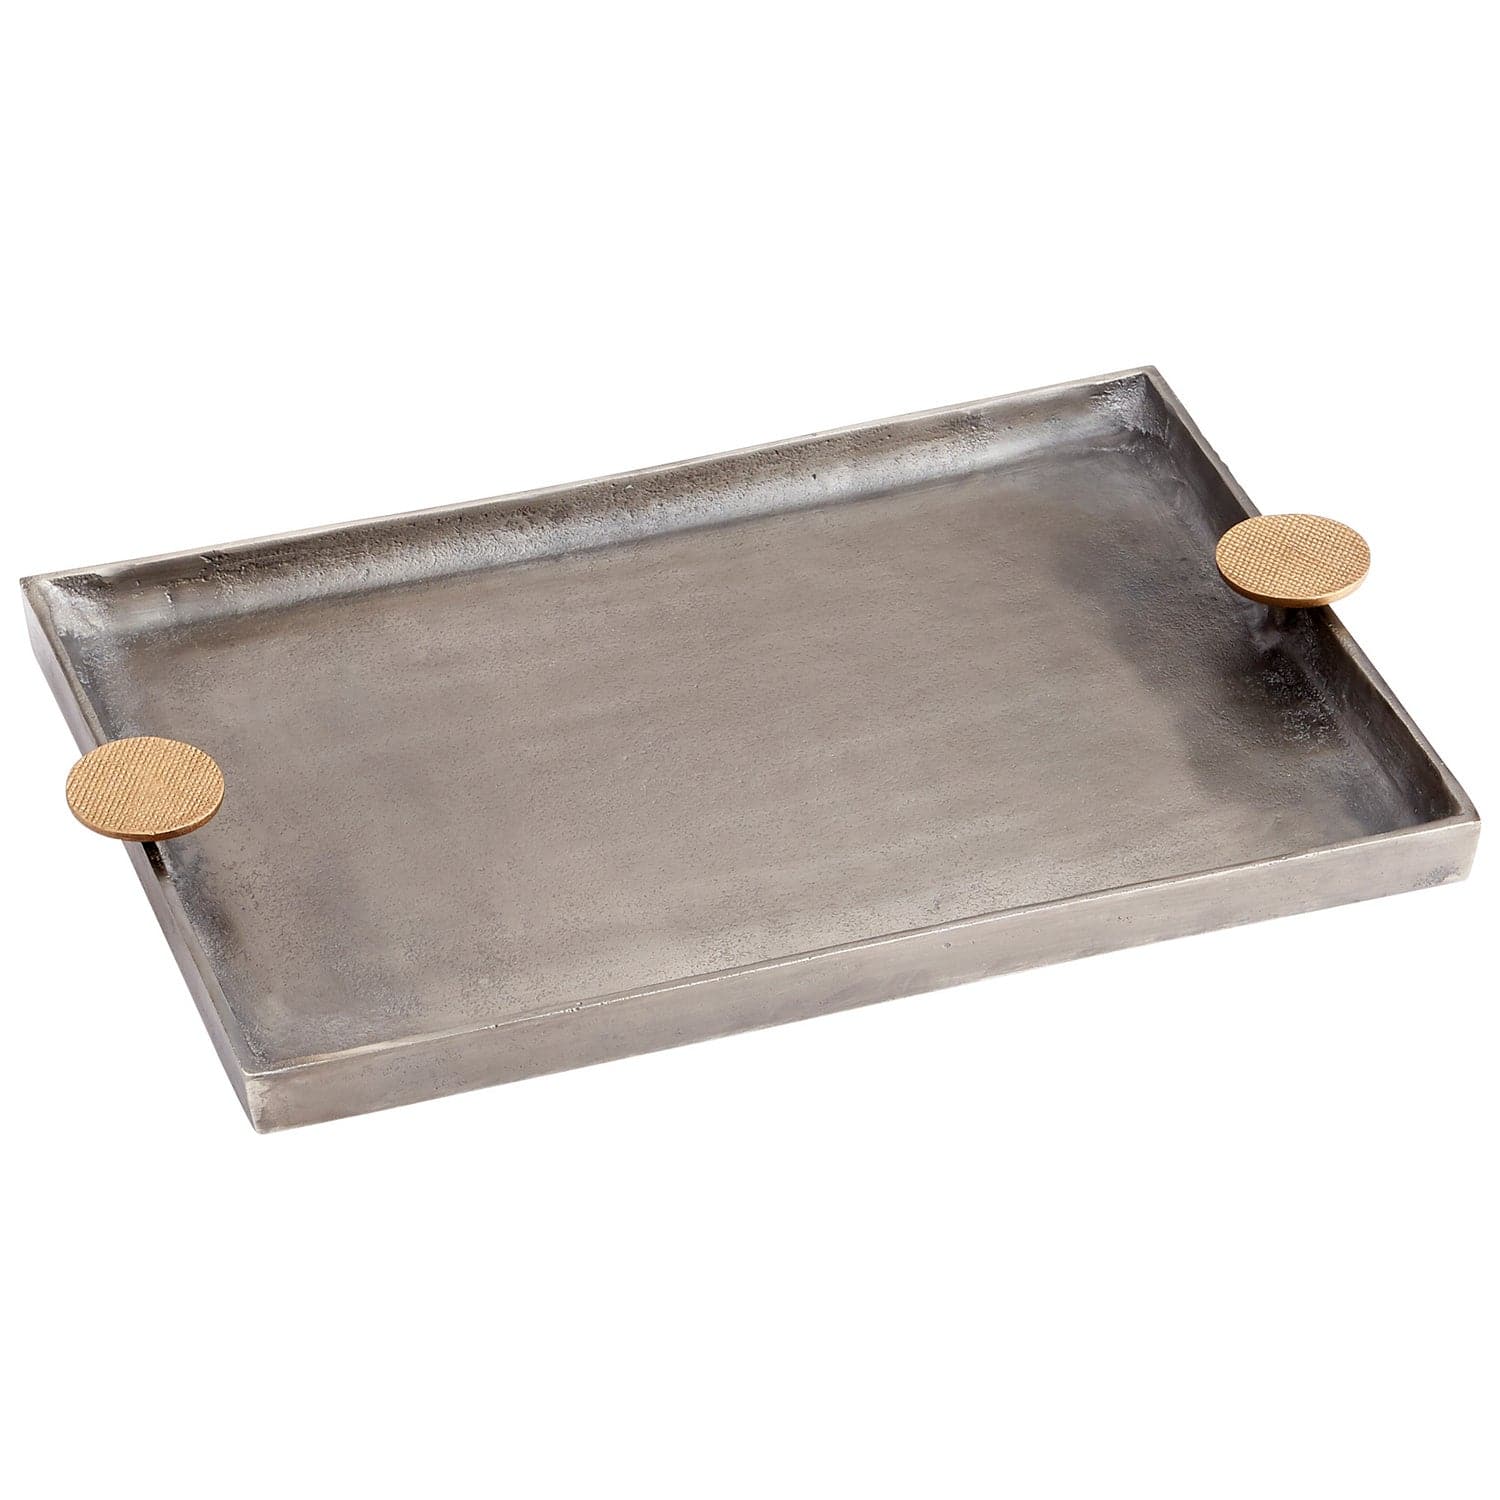 Cyan - 10737 - Tray - Silver And Gold